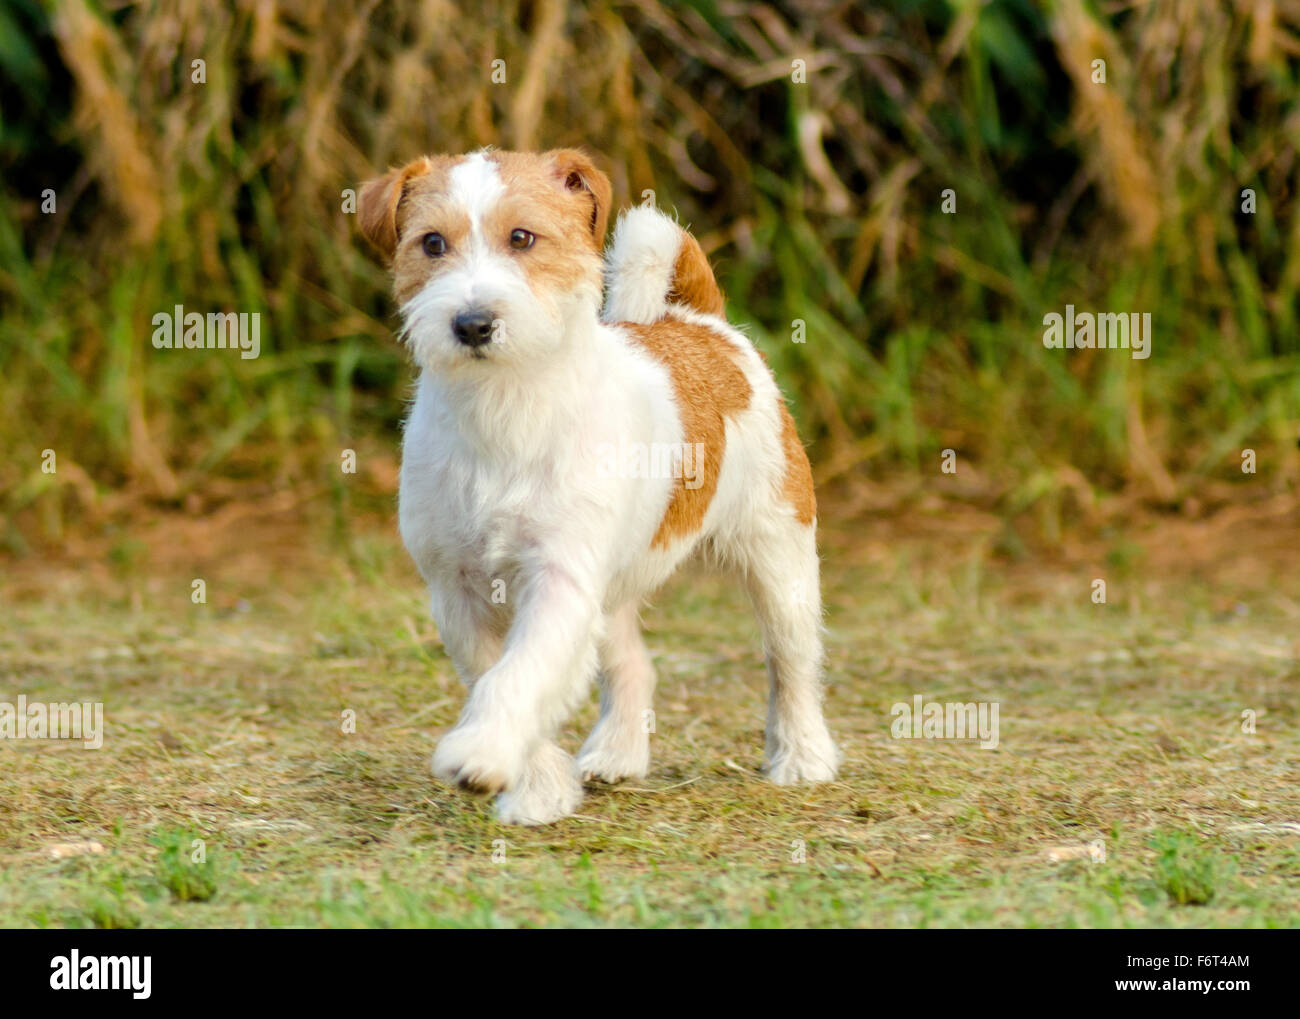 Tan And White Dog High Resolution Stock 